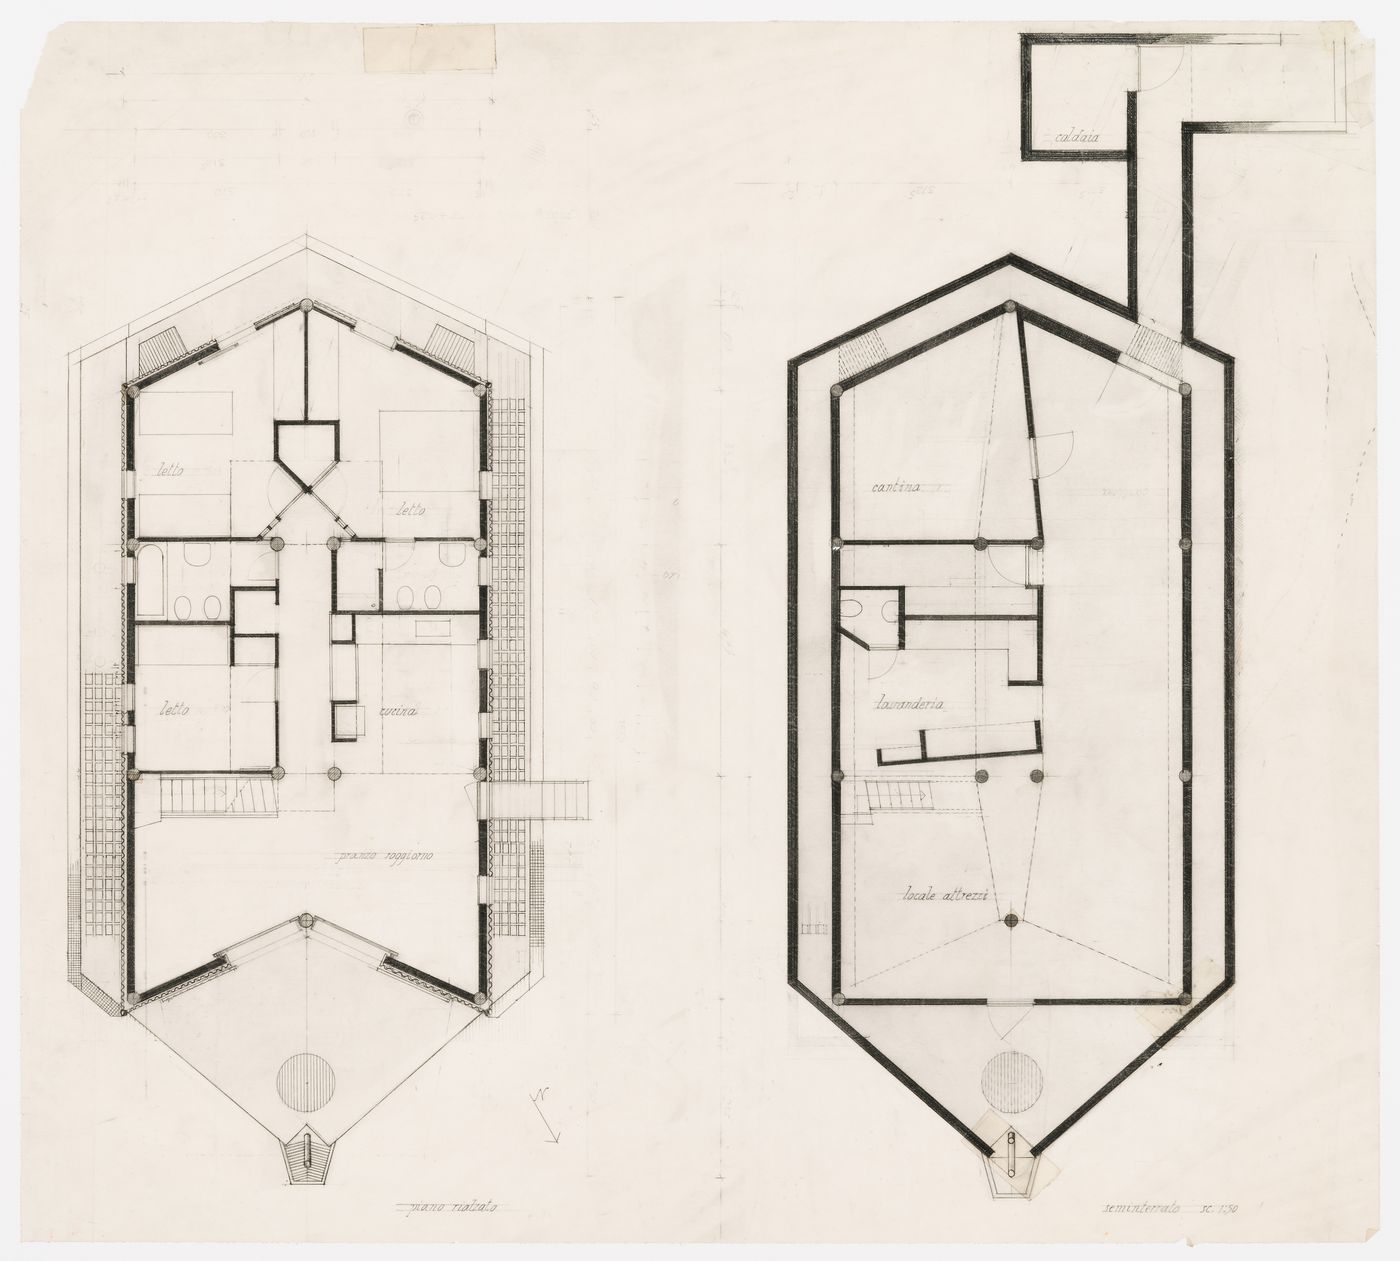 Plans of the ground floor and the basement for Casa Ferrario, Osmate, Italy